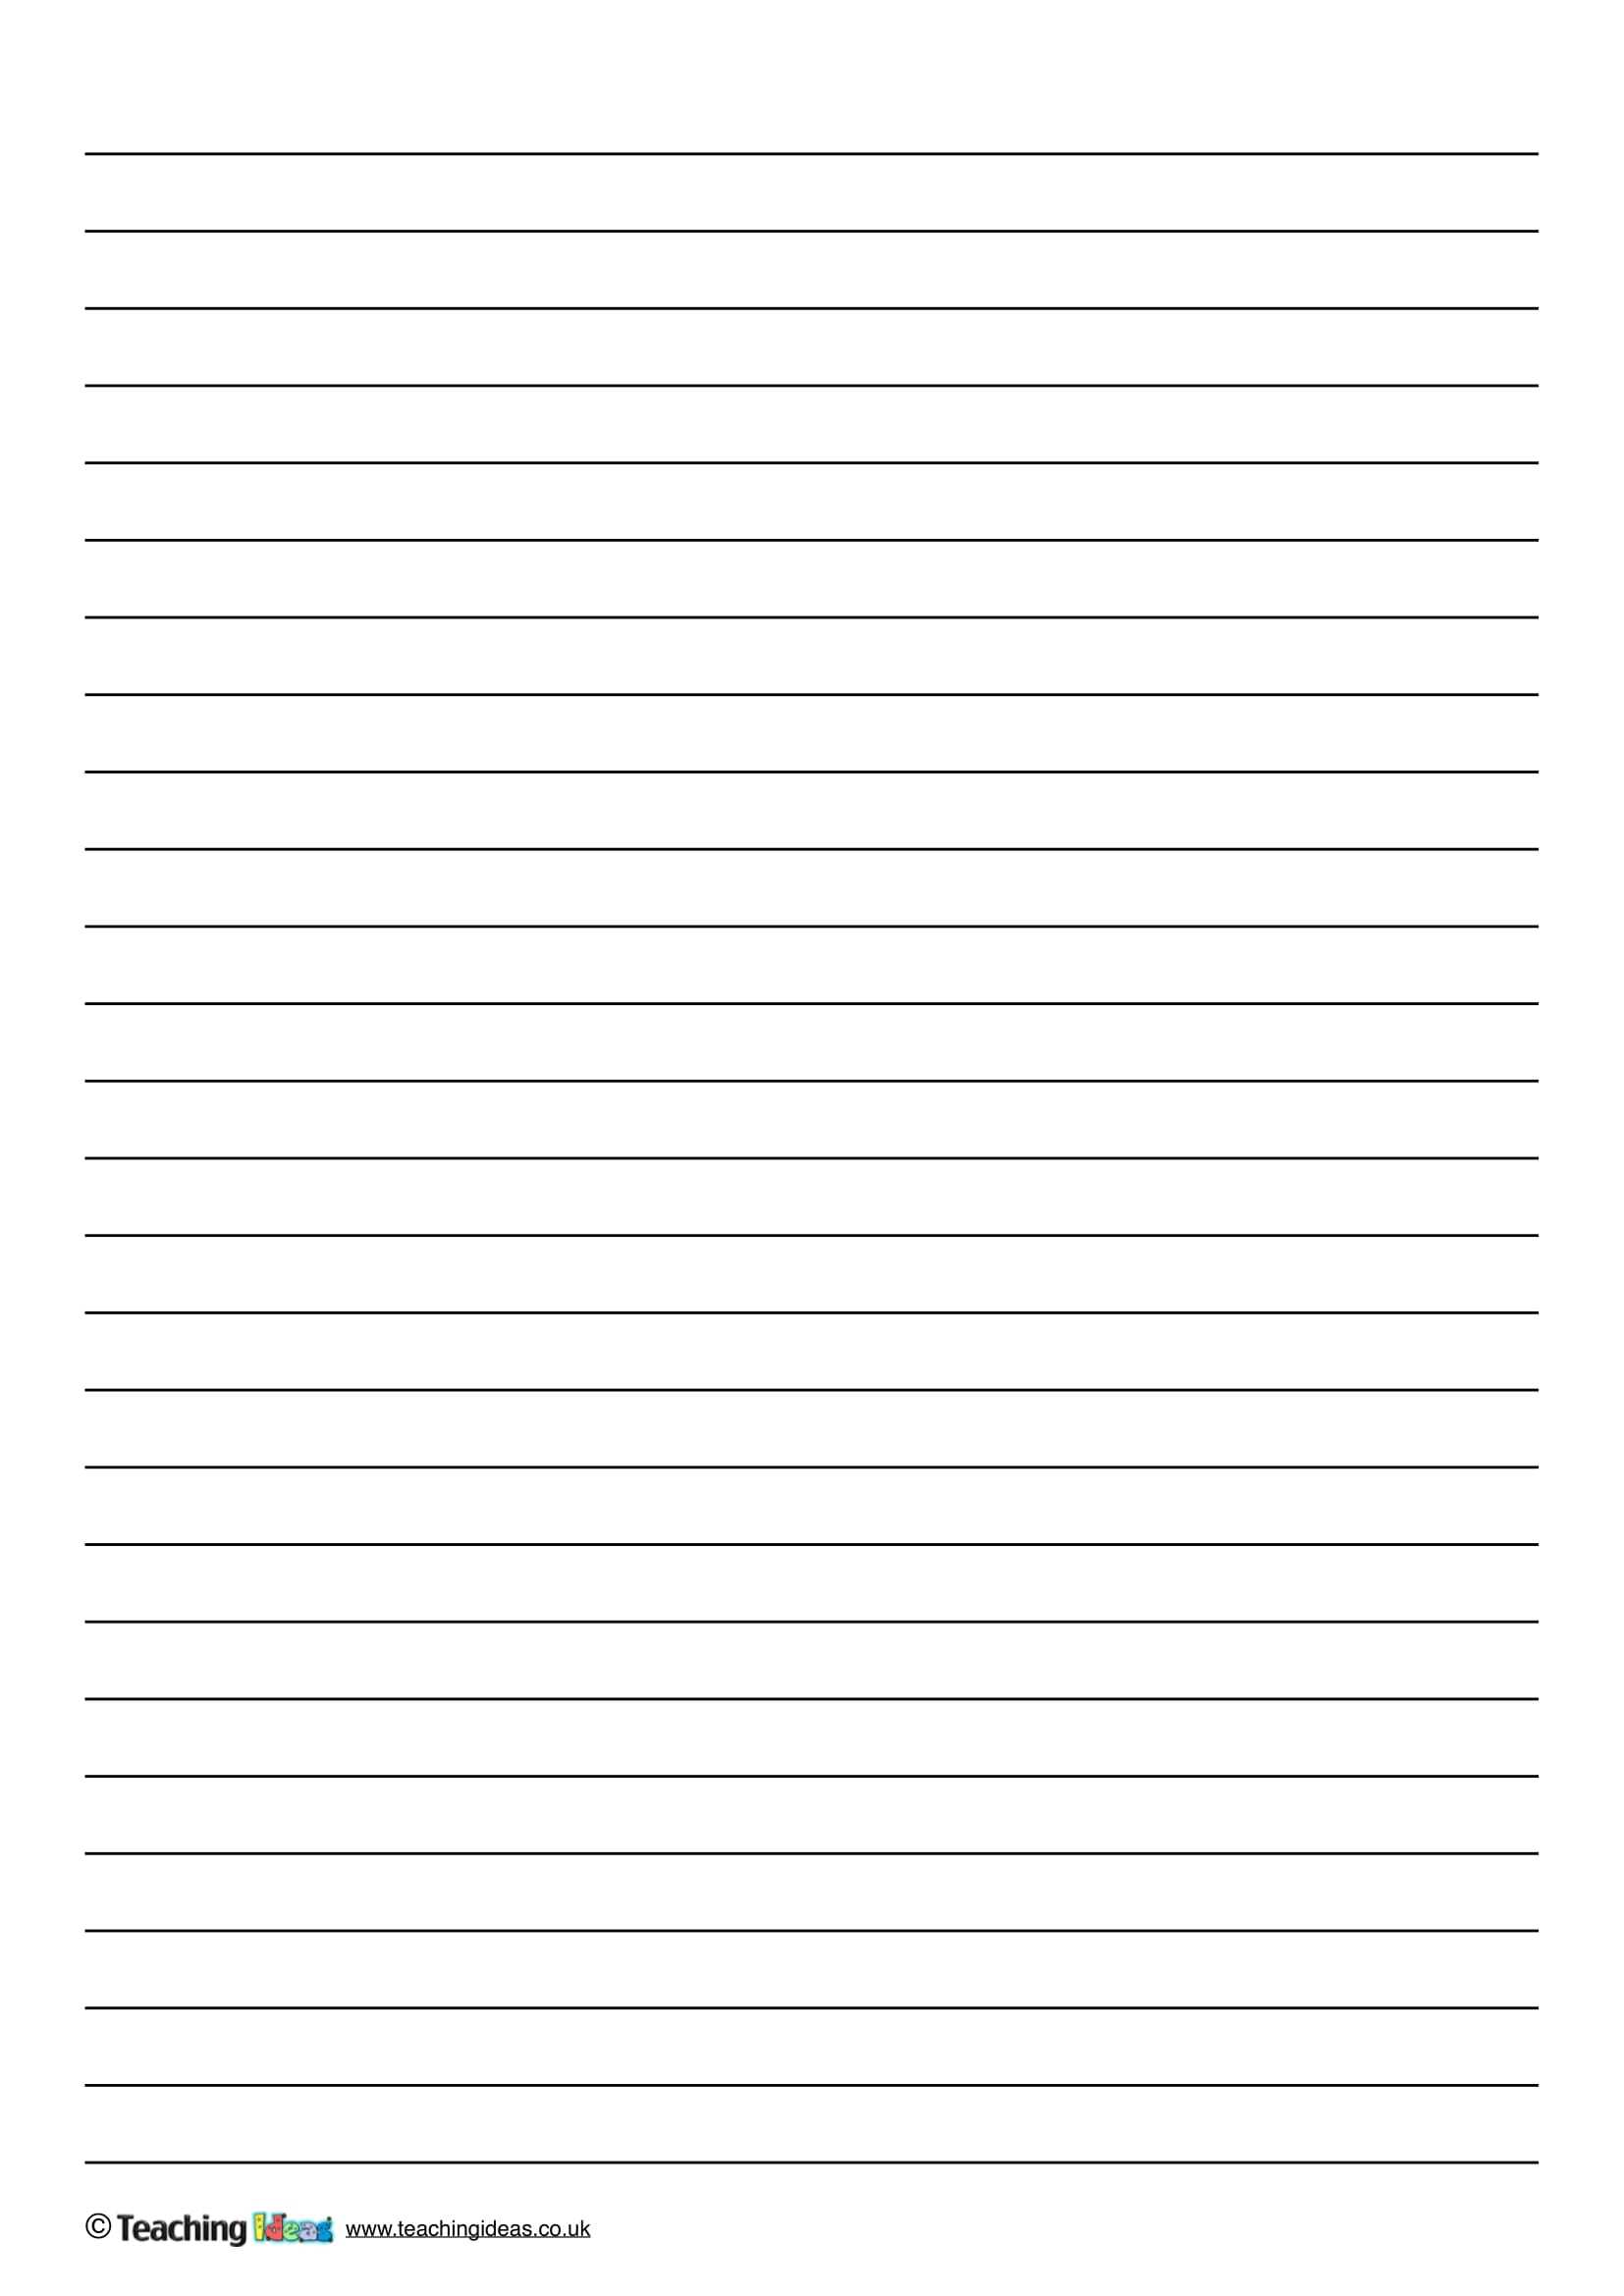 Ruled Paper Template - Dalep.midnightpig.co Within Ruled Paper Word Template